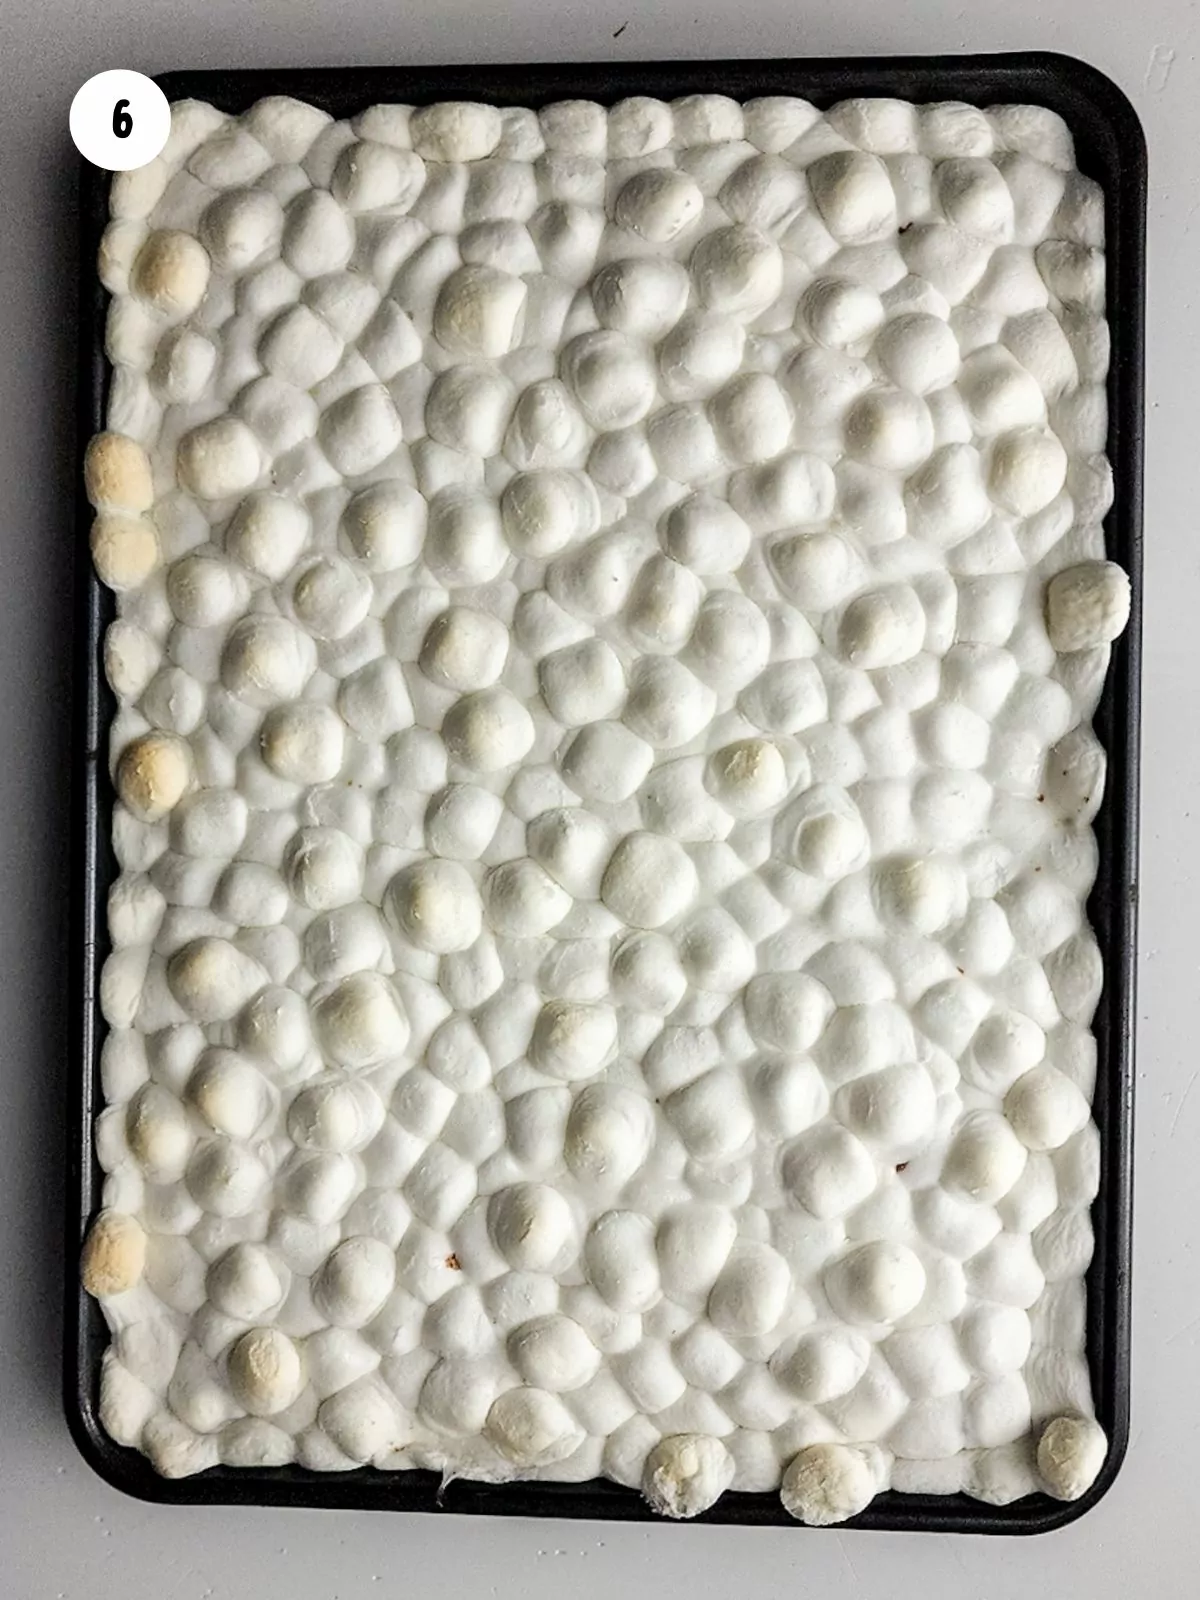 marshmallows baked on top of baked brownies in pan.